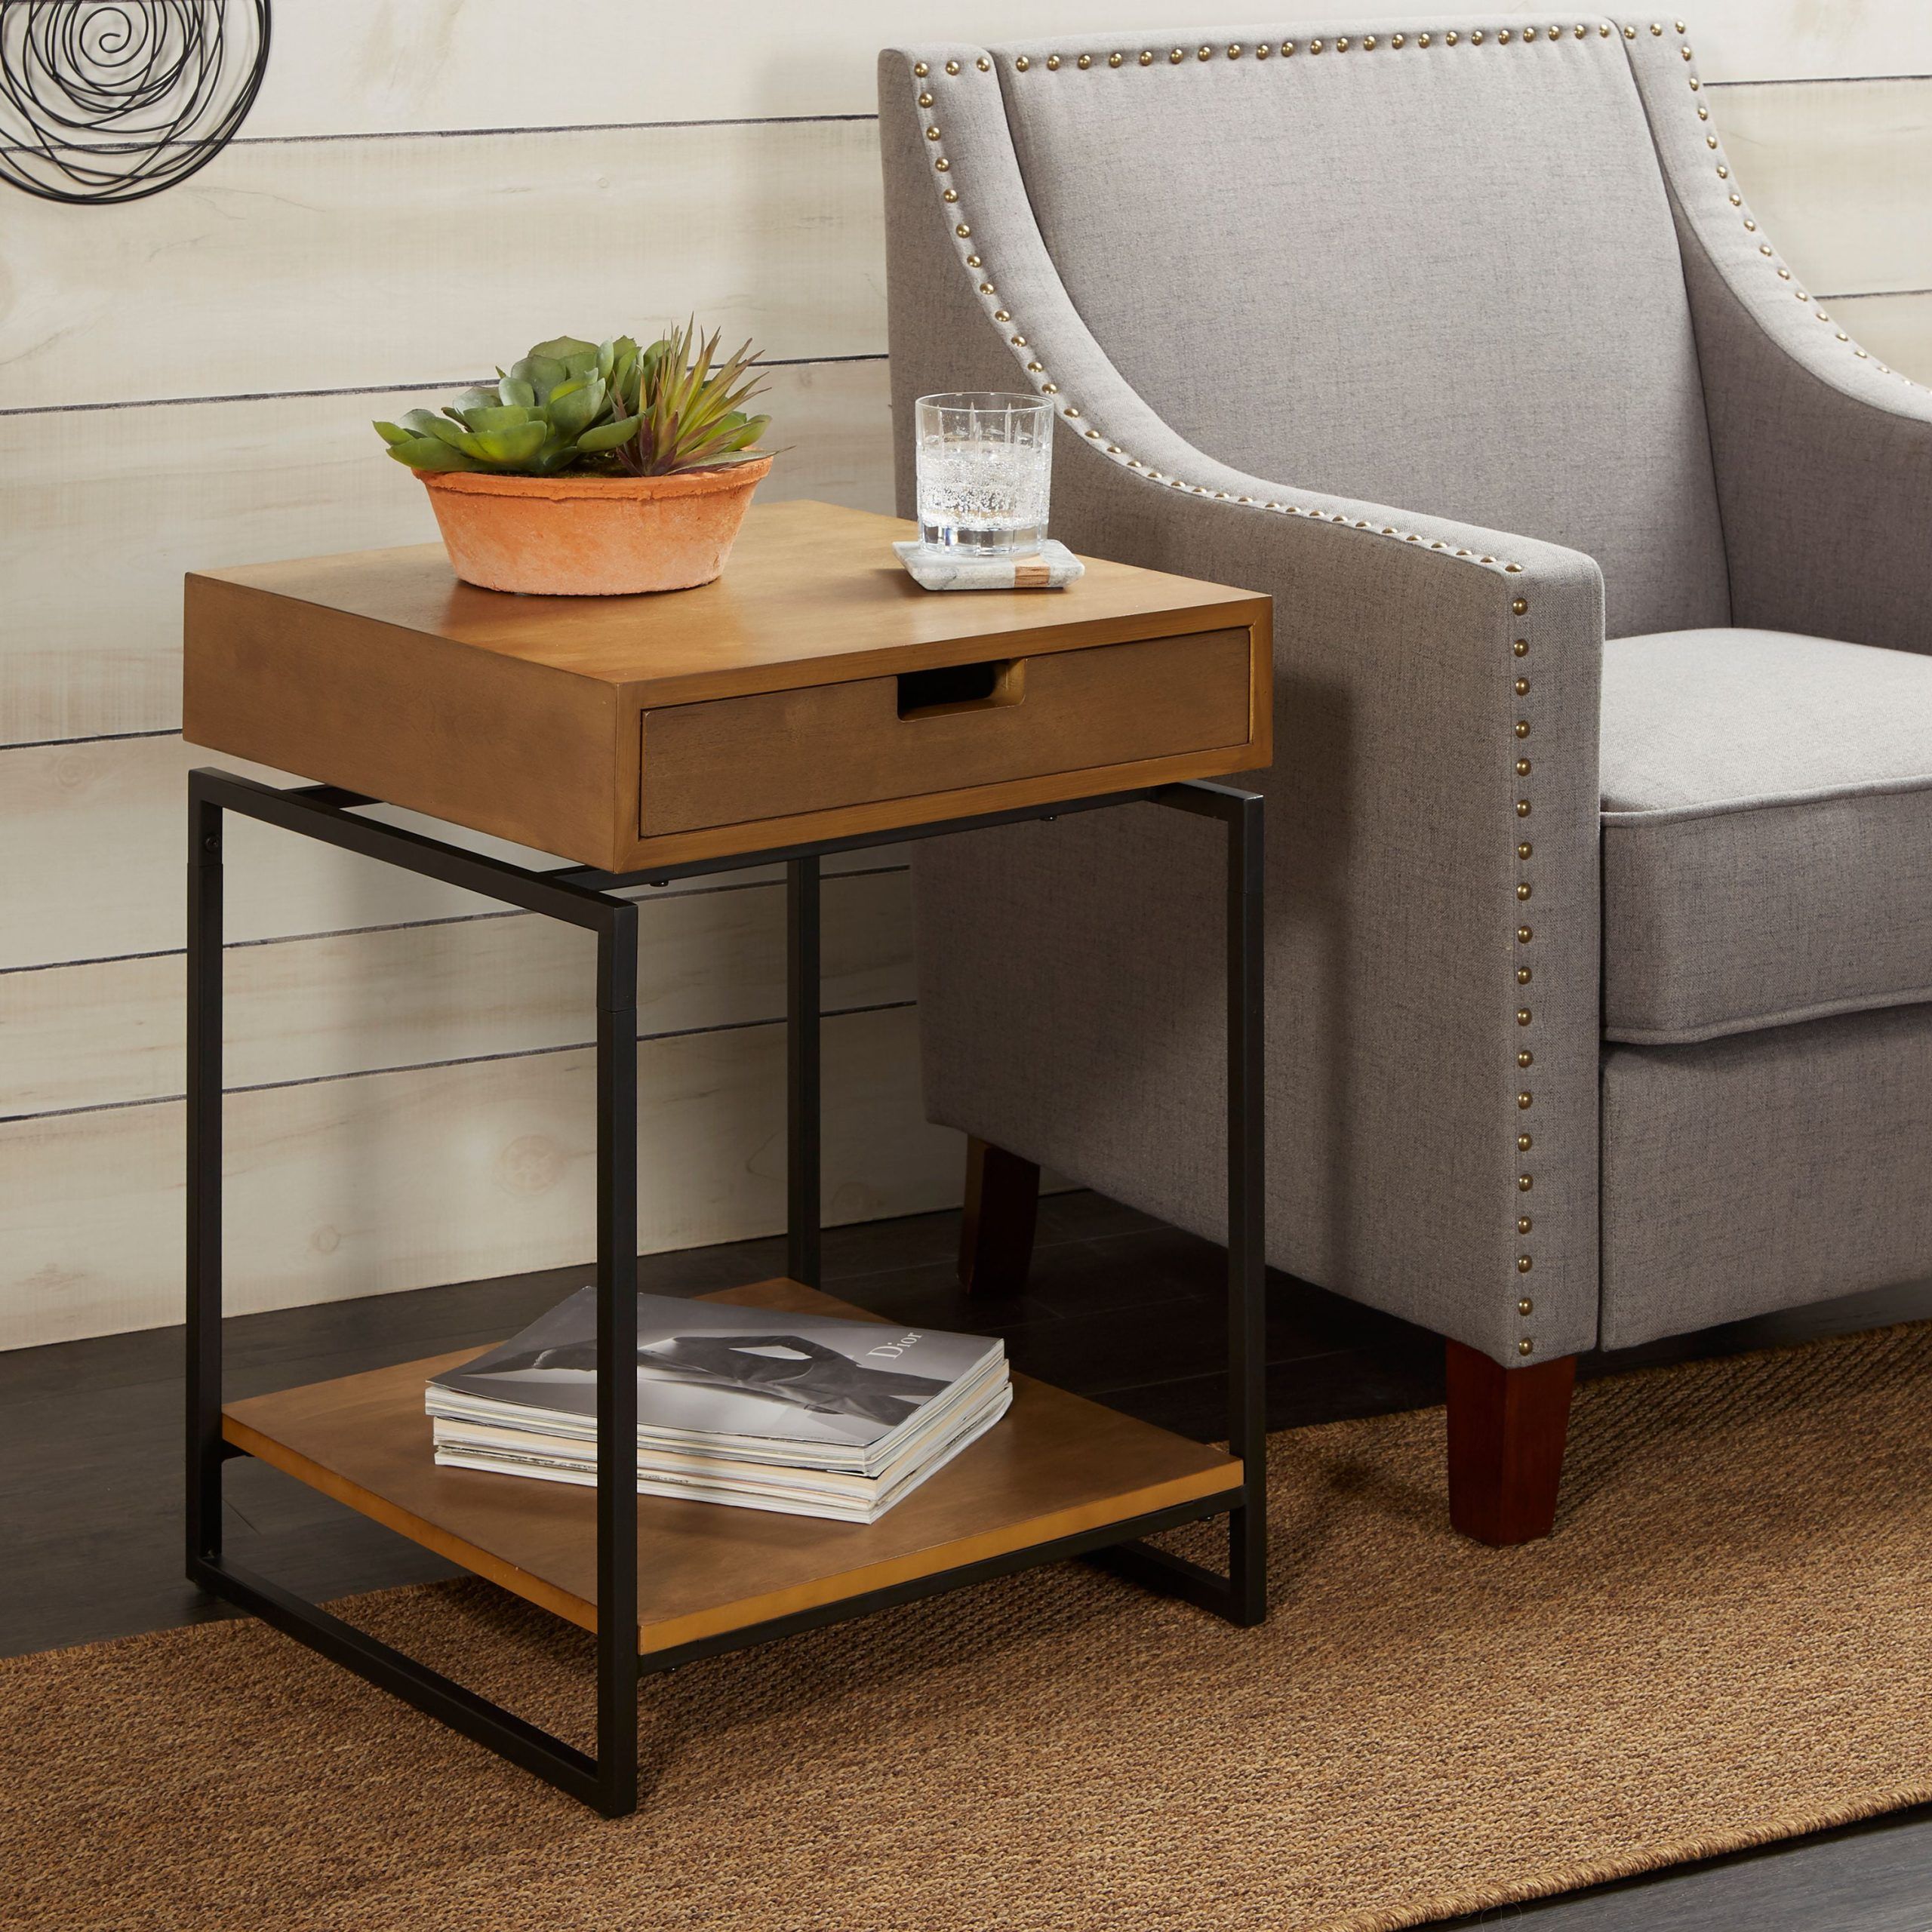 Better Homes & Gardens Juno Natural Wood End Table With Drawer With Freestanding Tables With Drawers (View 6 of 20)